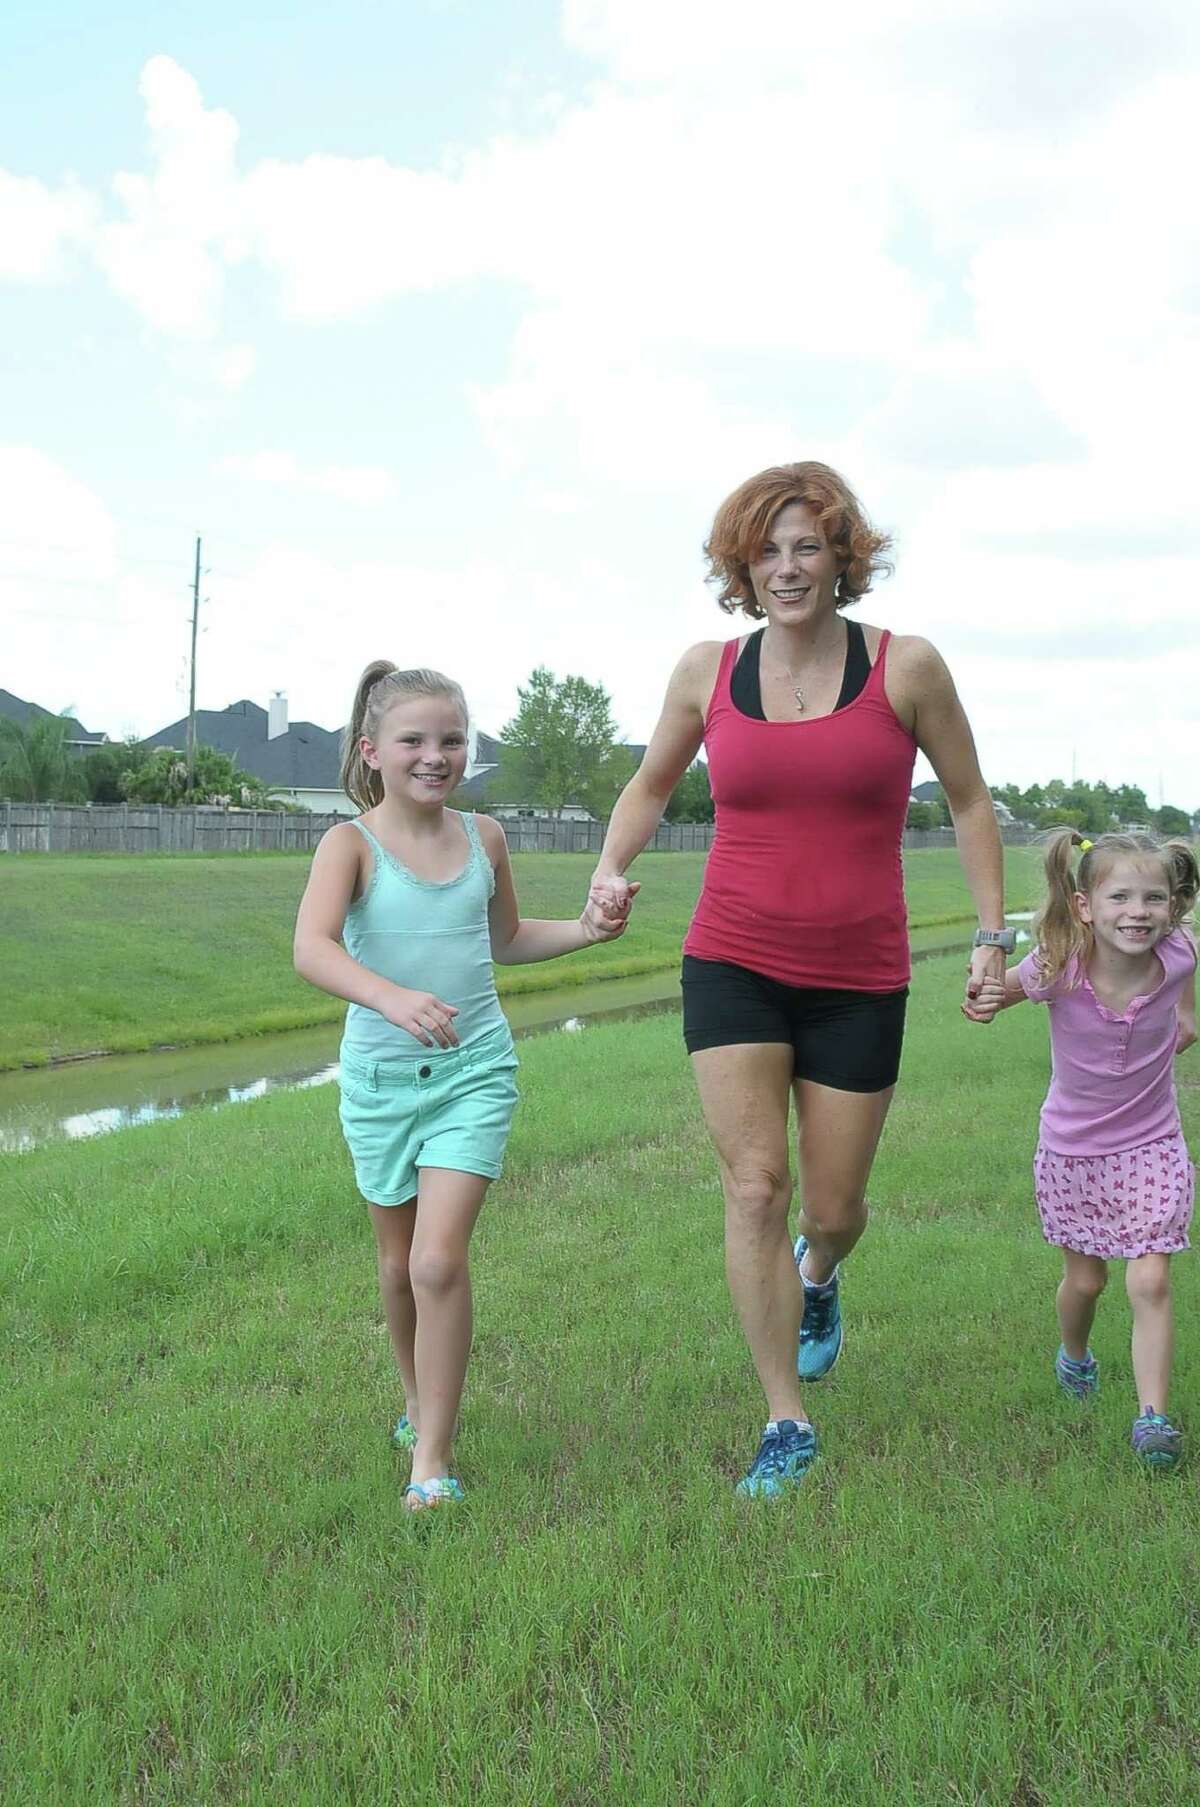 Kimberly Rensel runs with her daughters Sadie Rensel, 7½, and Savannah Rensel, 6, near their home in Katy. She is running to raise money to go on a mission to Africa. Kimberly Rensel runs with her daughters Sadie Rensel, 7½, and Savannah Rensel, 6, near their home in Katy. She is running to raise money to go on a mission to Africa.